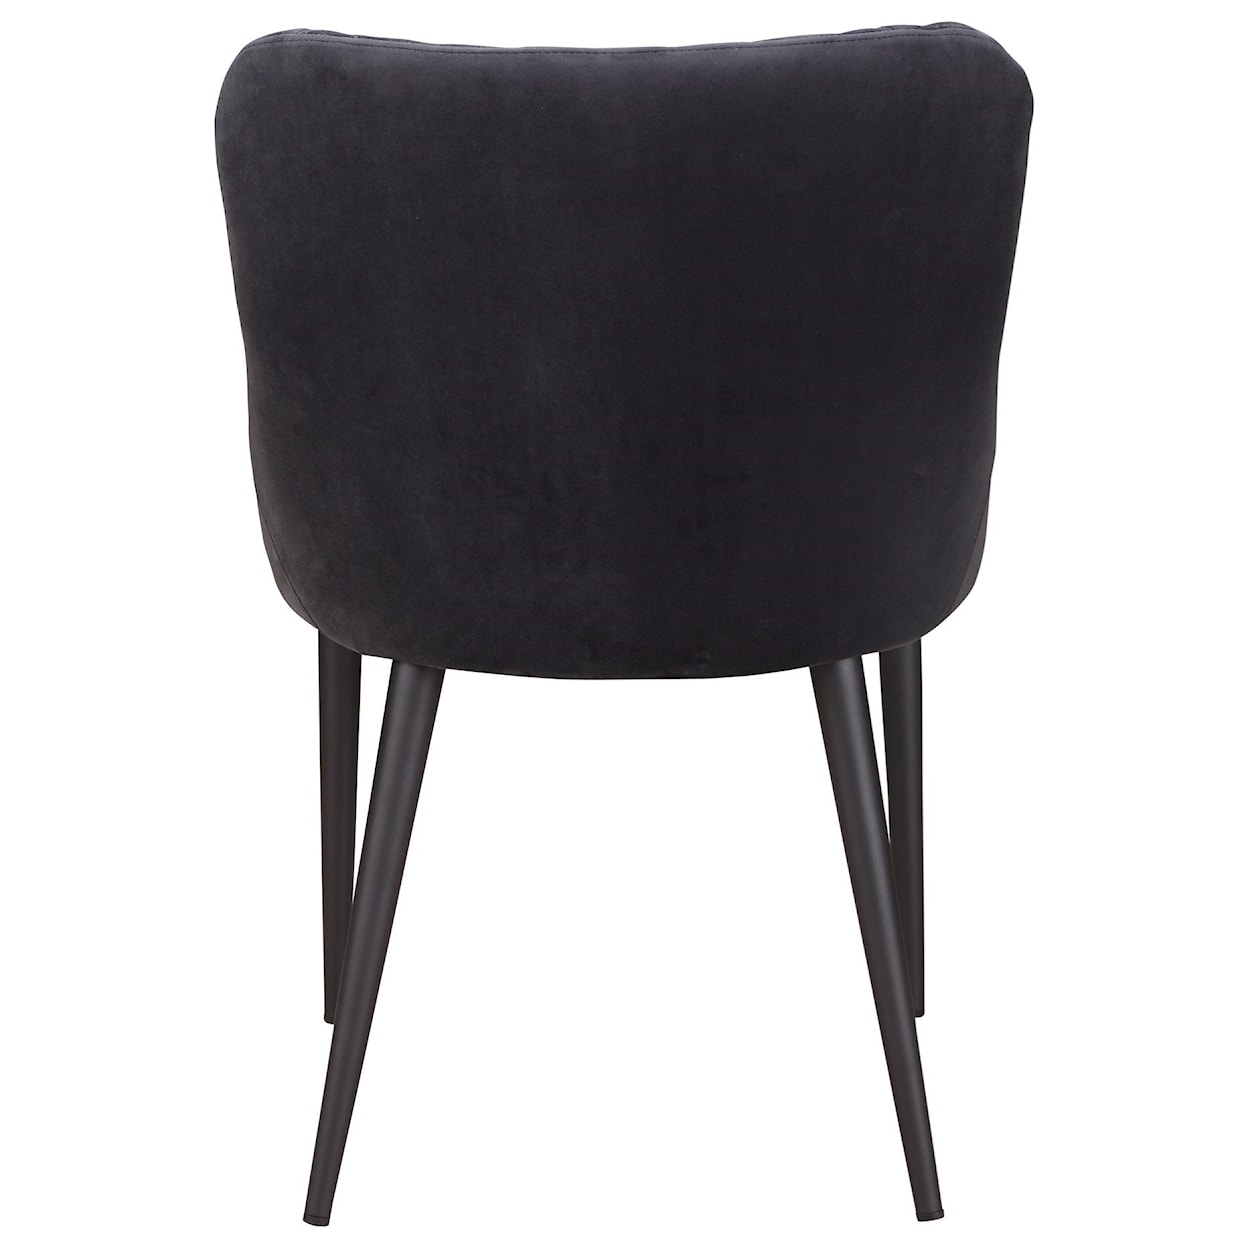 Moe's Home Collection Etta Dining Chair